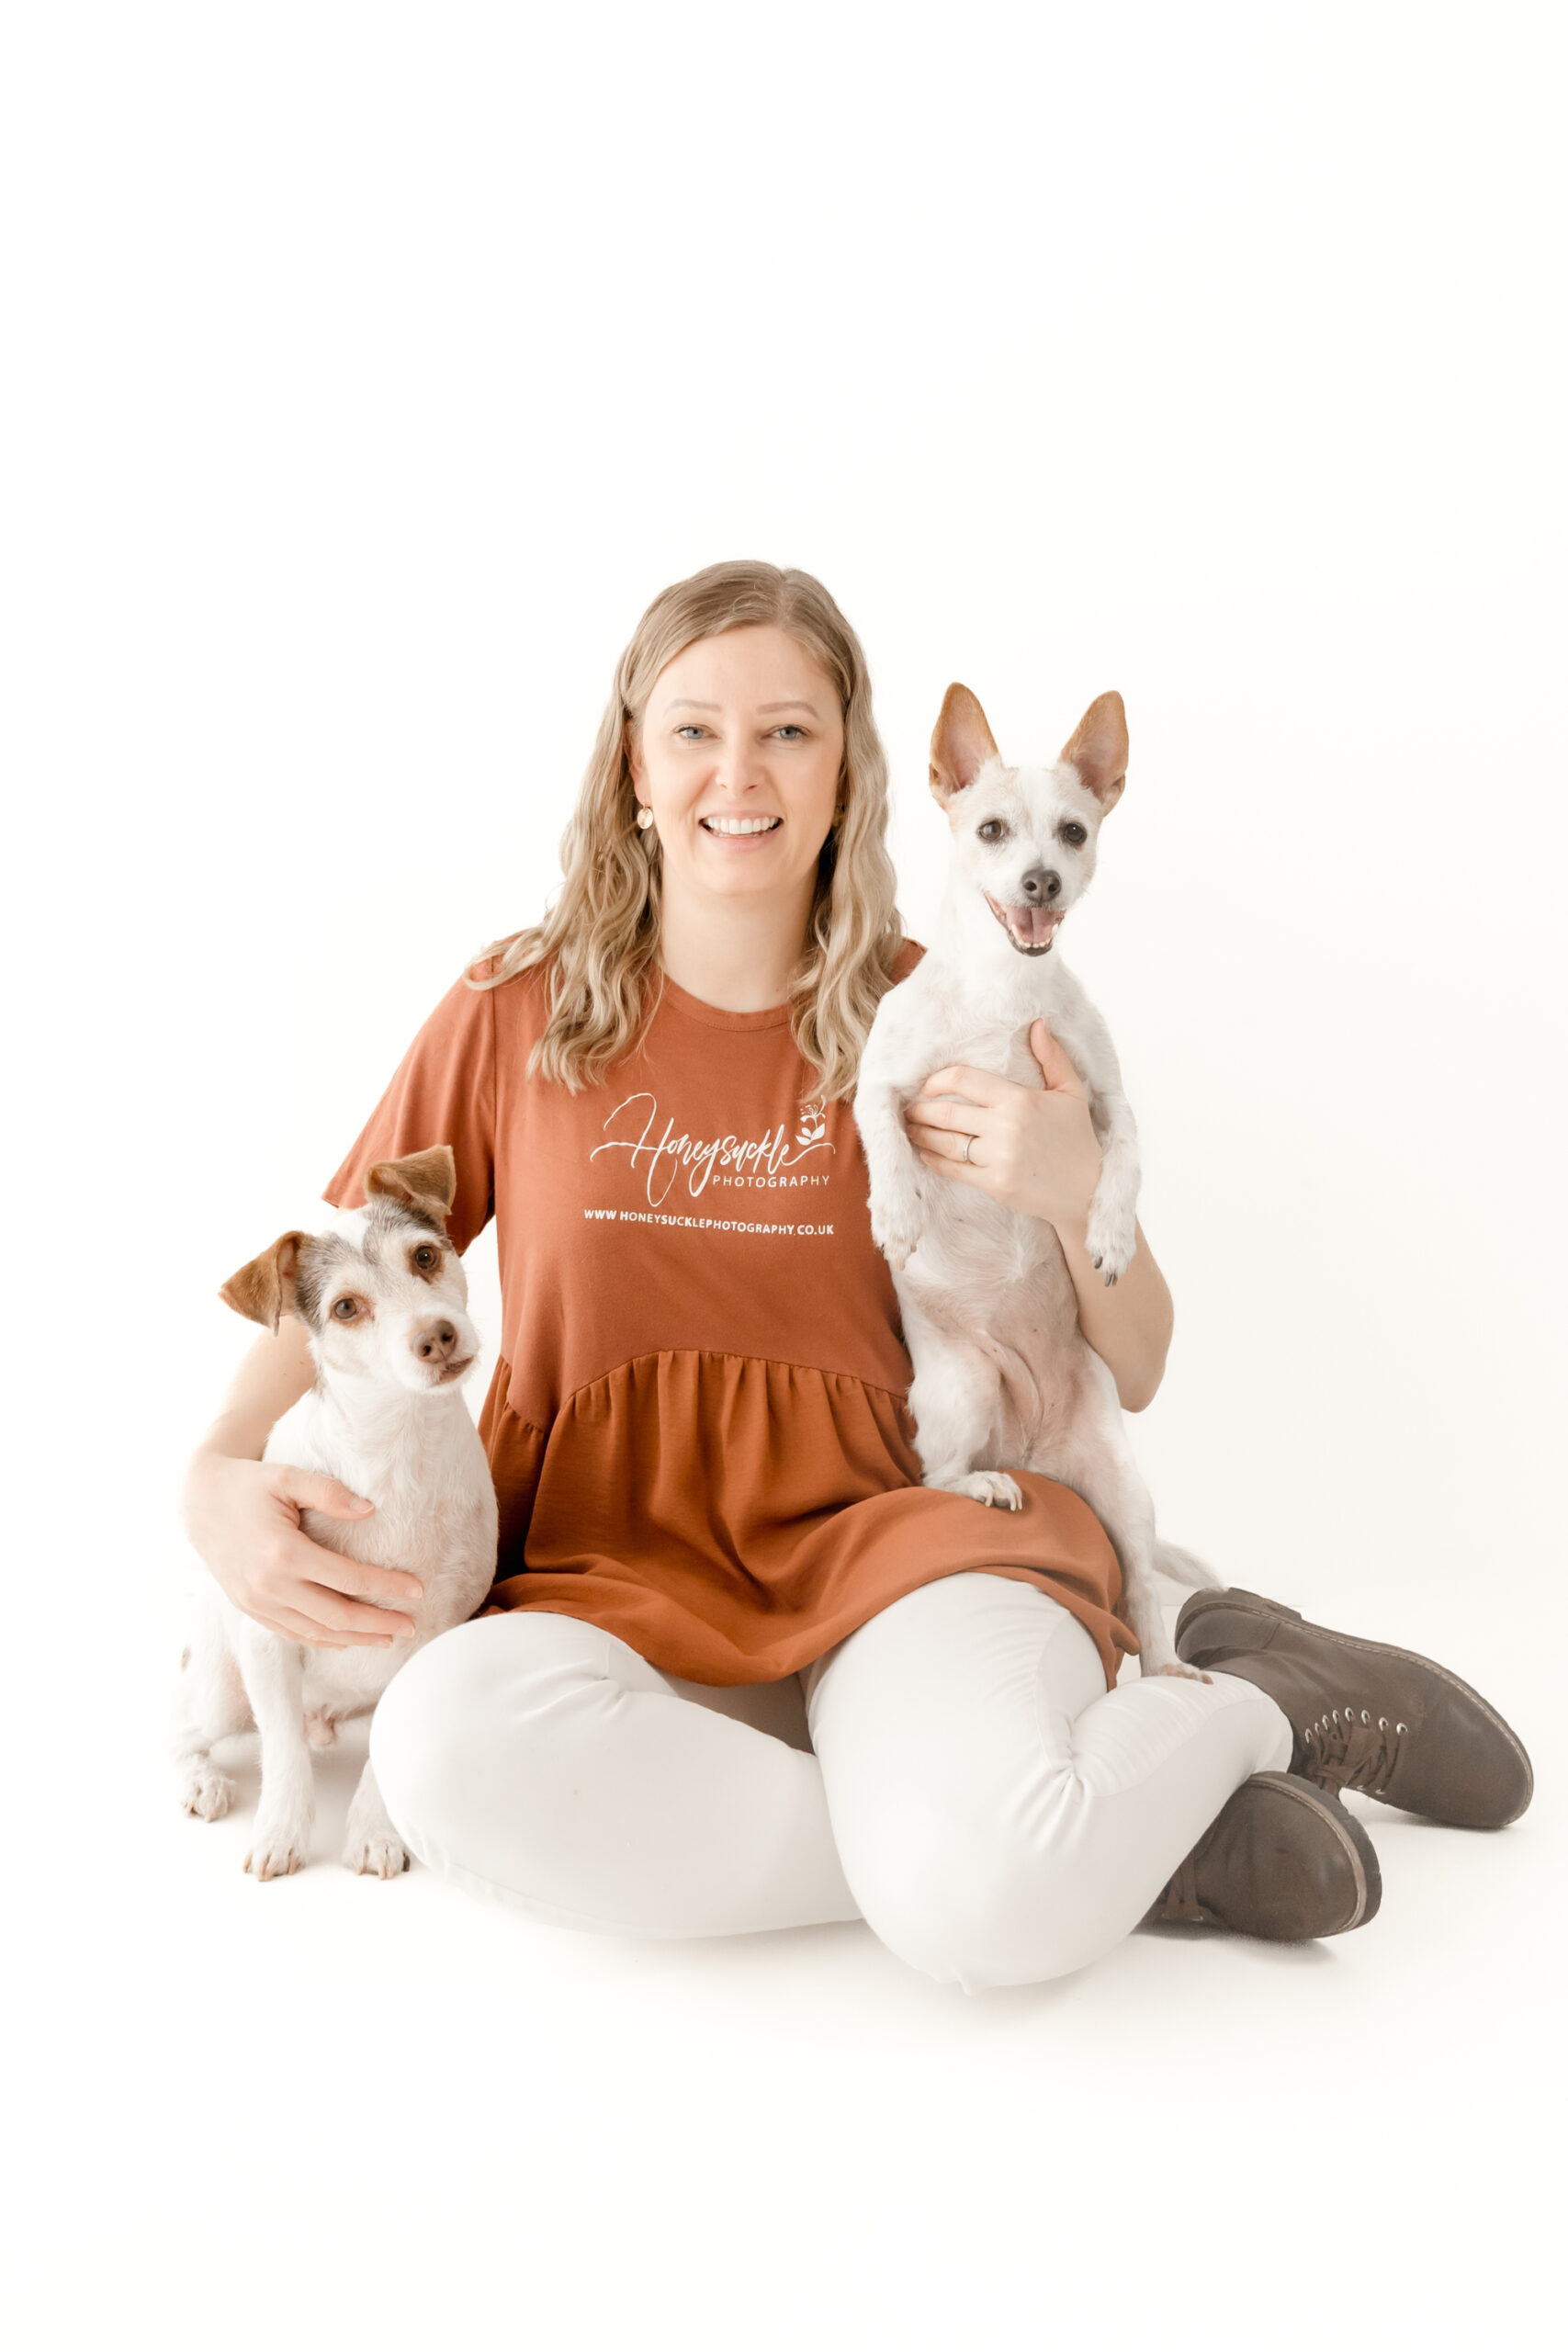 2 jack russell dogs with owner at dog photoshoot in colchester